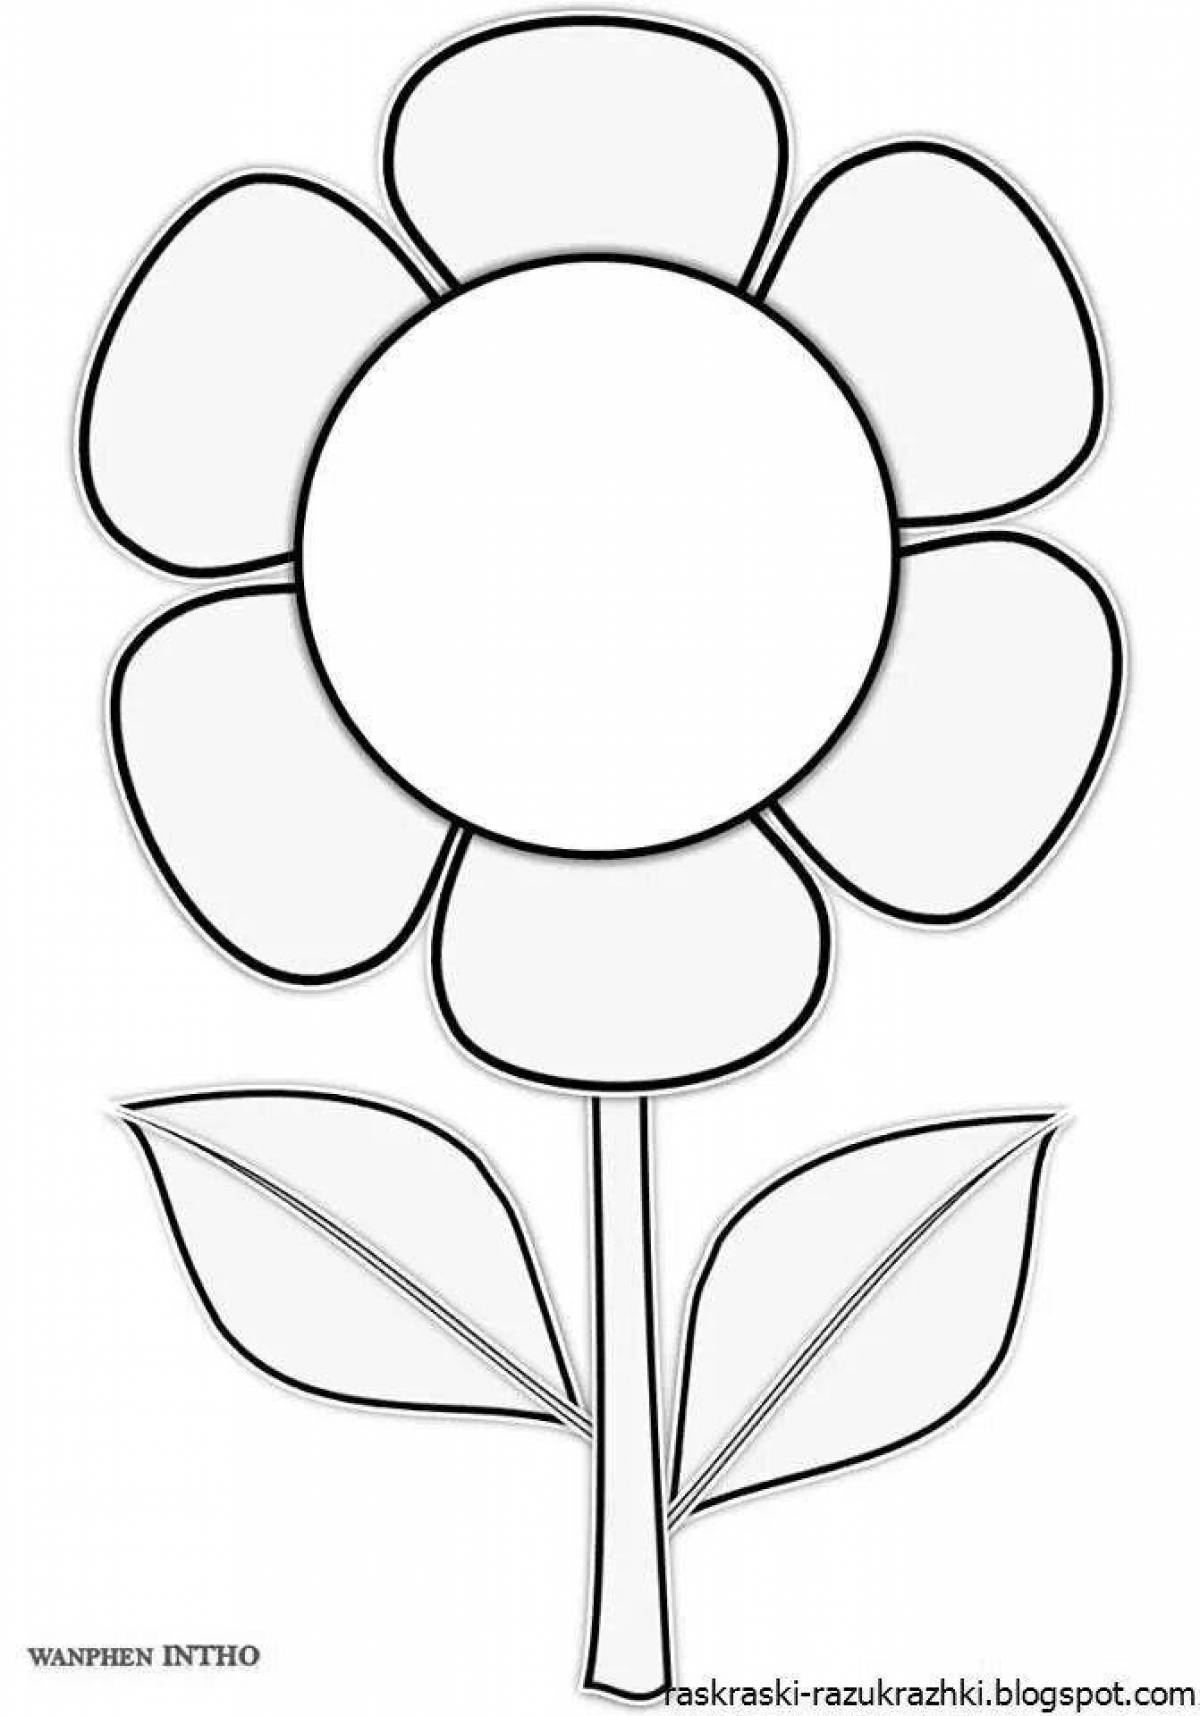 Delightful coloring book with flowers